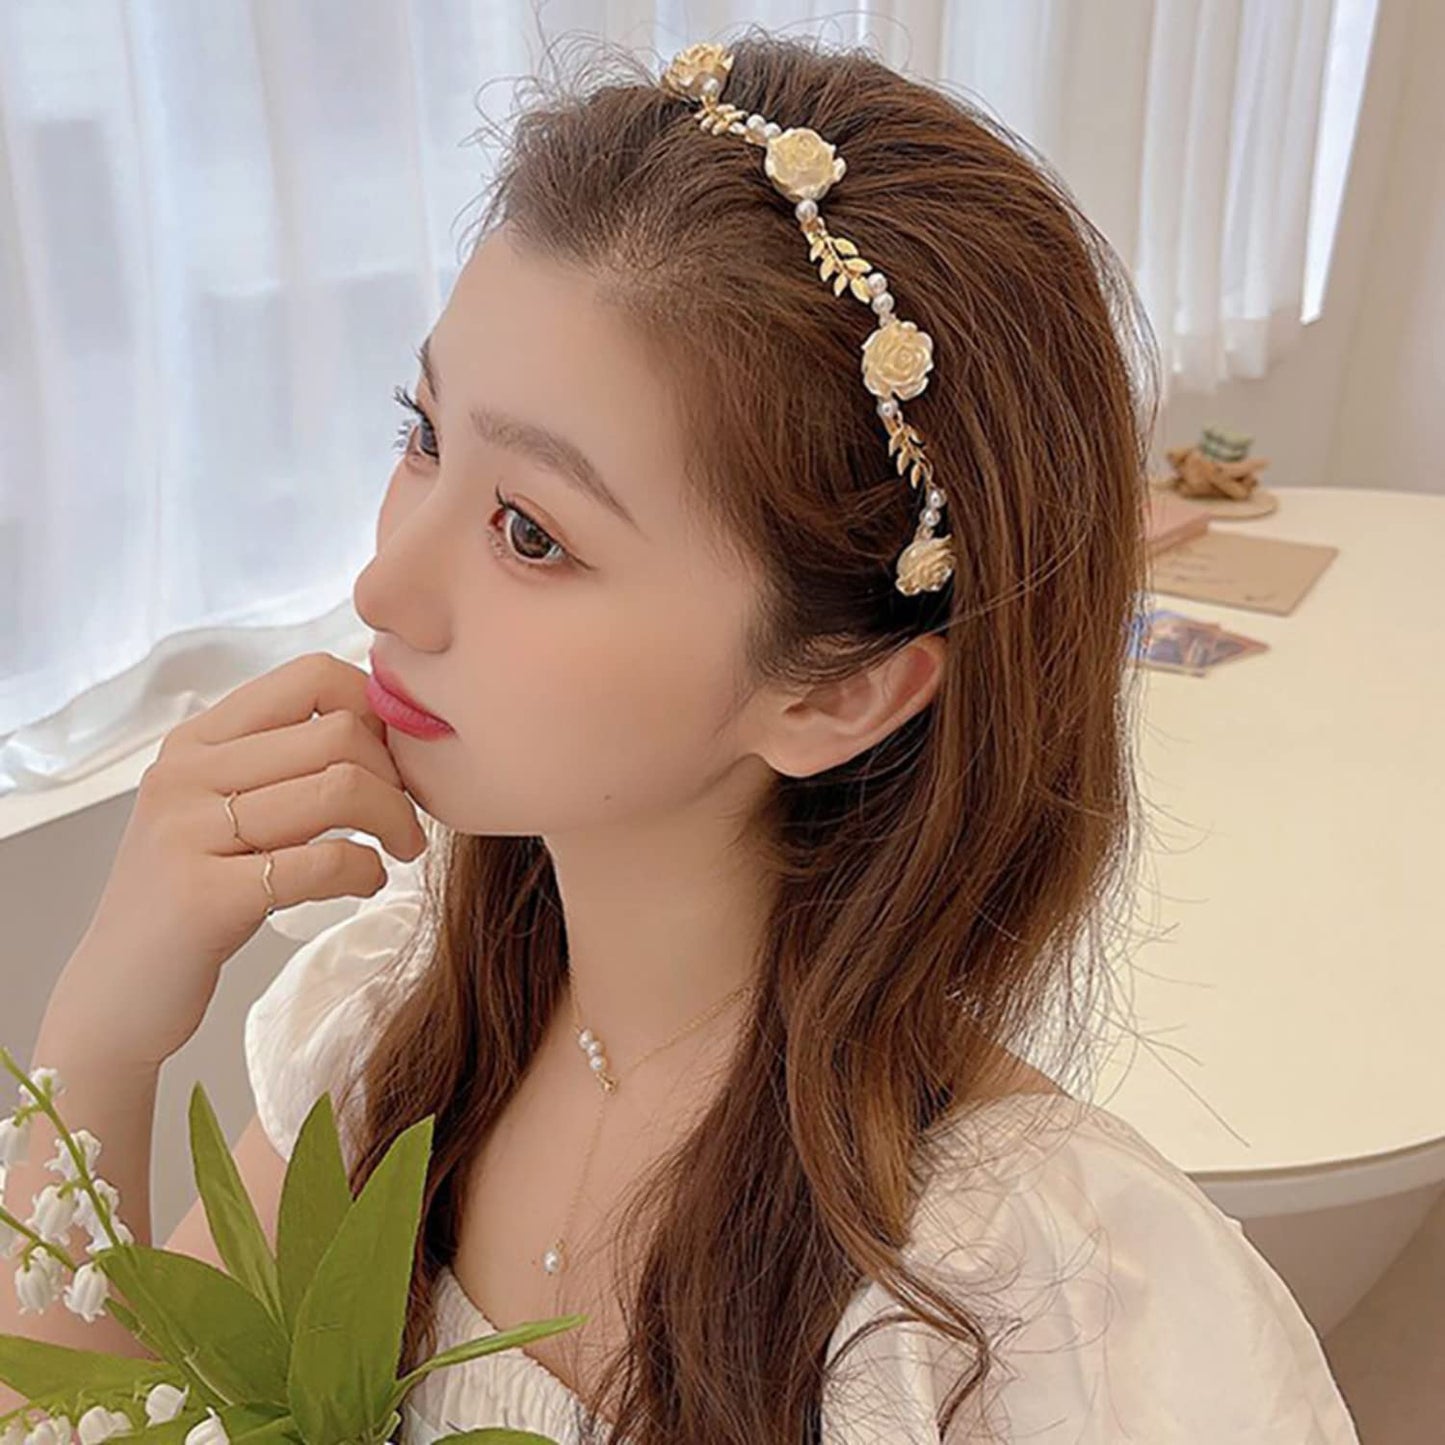 Valentine Headband Hair Clips Flower Hair Accessories Metal Gold White Rose Exquisite Floral Rose Design Elegant Hair Hoop Hairbands Hair Band Ornaments Hairpin for Women Girls for Wedding 1Pcs